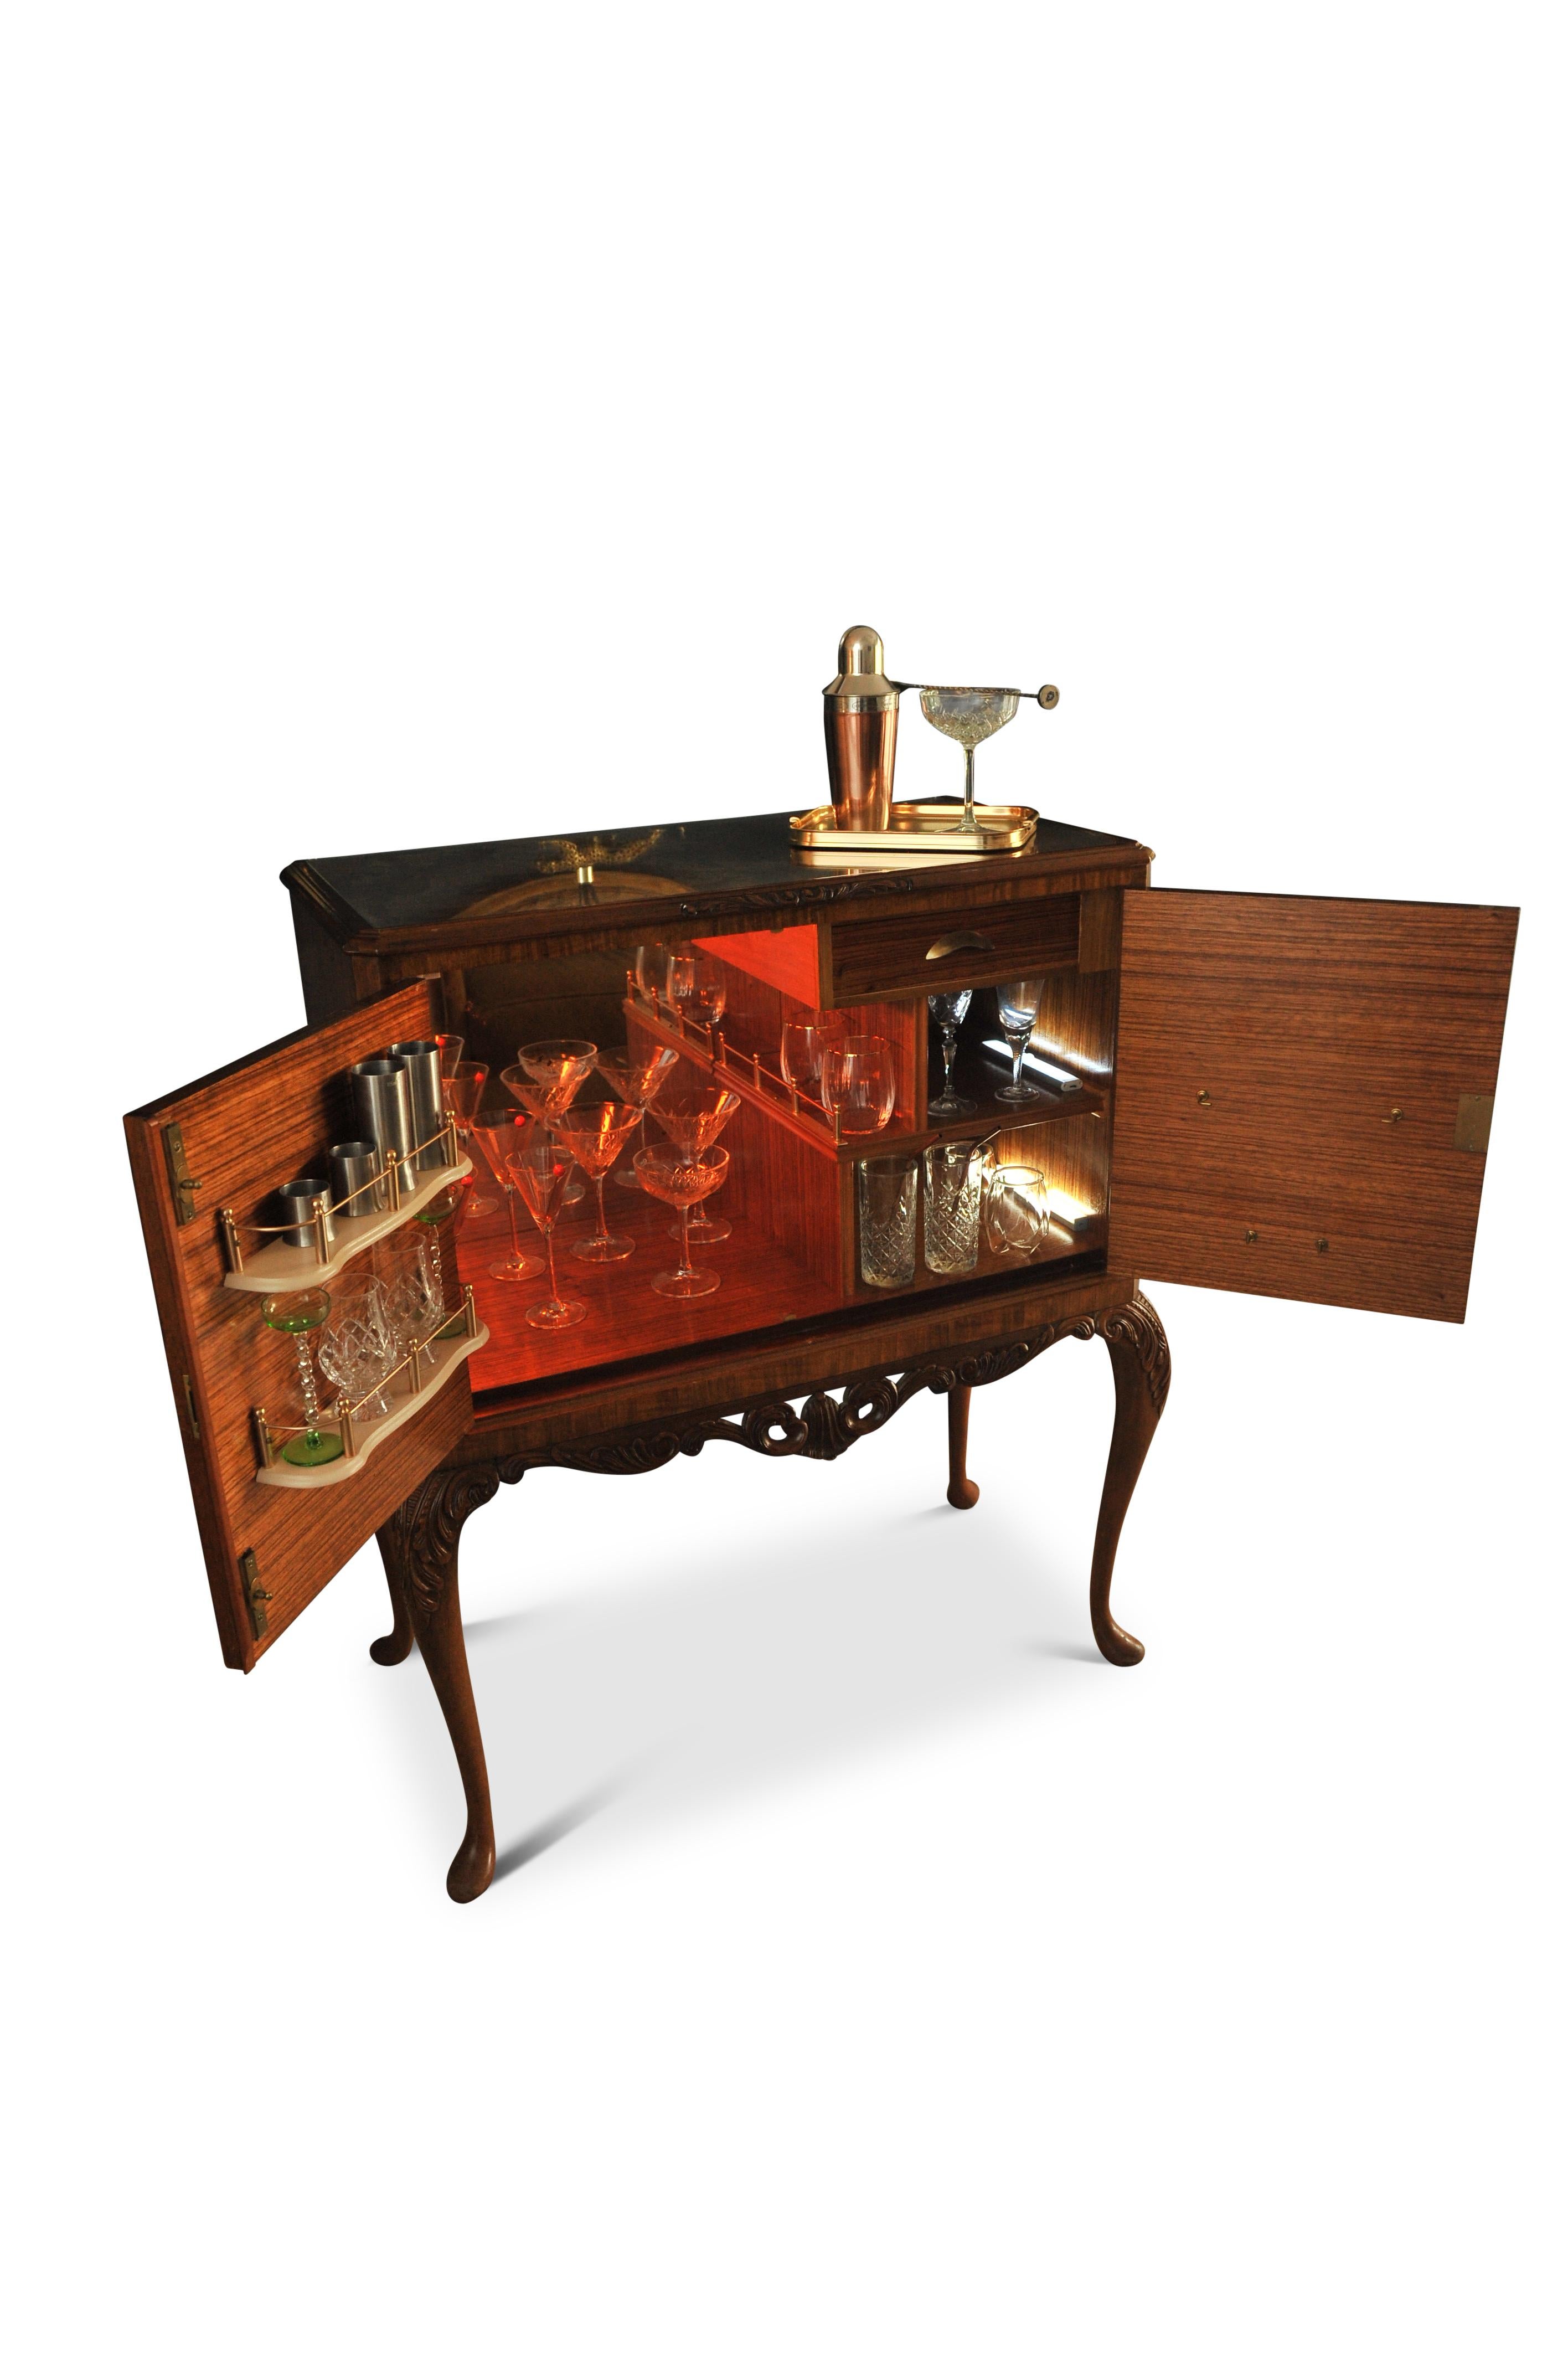 Queen Anne A Luxurious Burr Walnut Cocktail Cabinet With Light & Fitted Mirrored Interior 